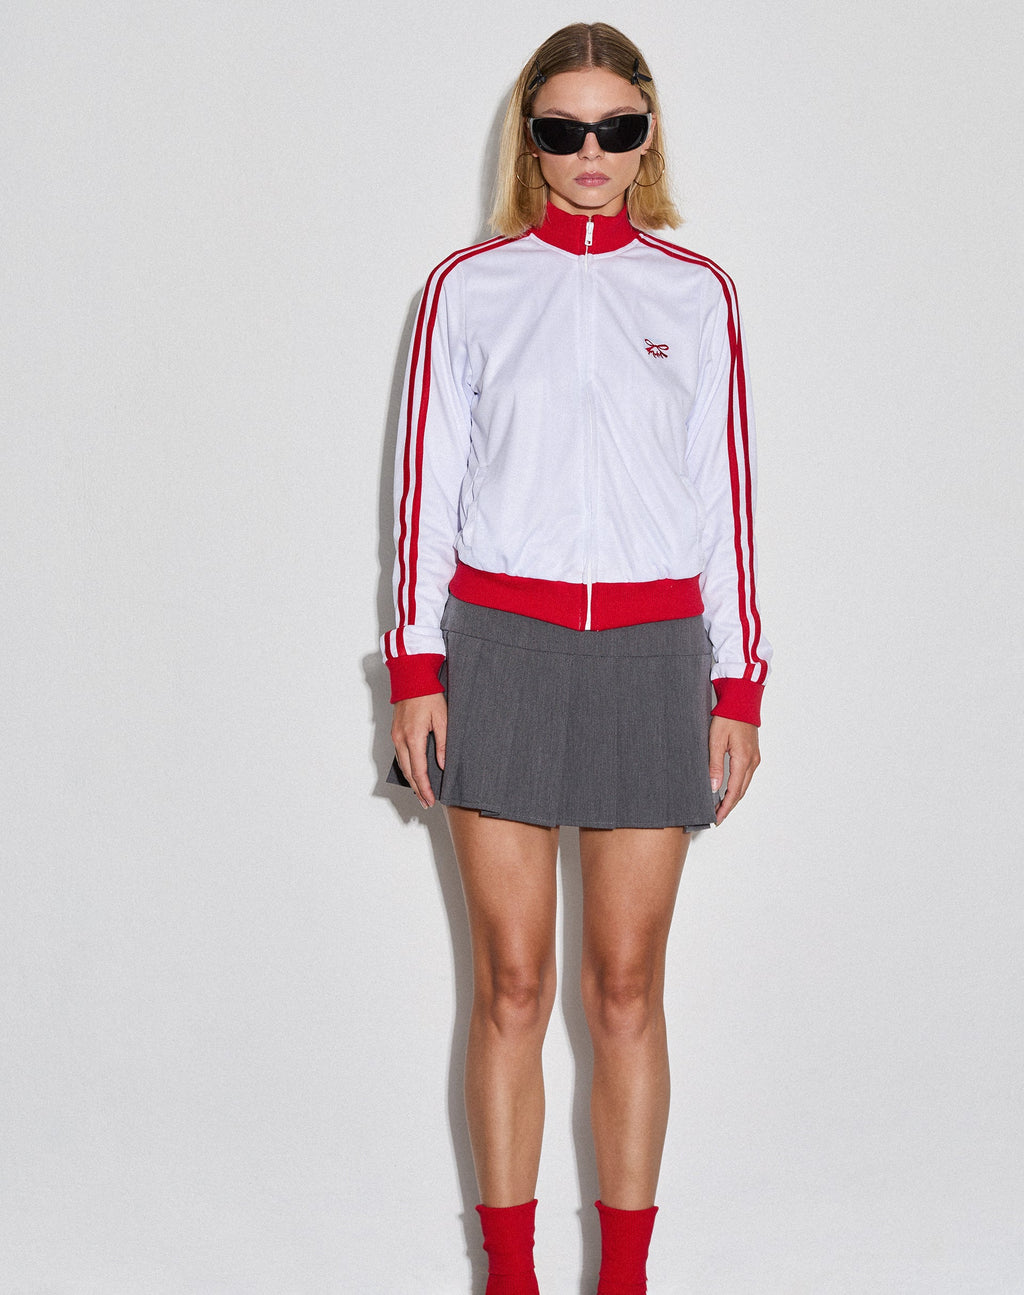 Makira Zip Up Jacket in White with Red Double Stripe